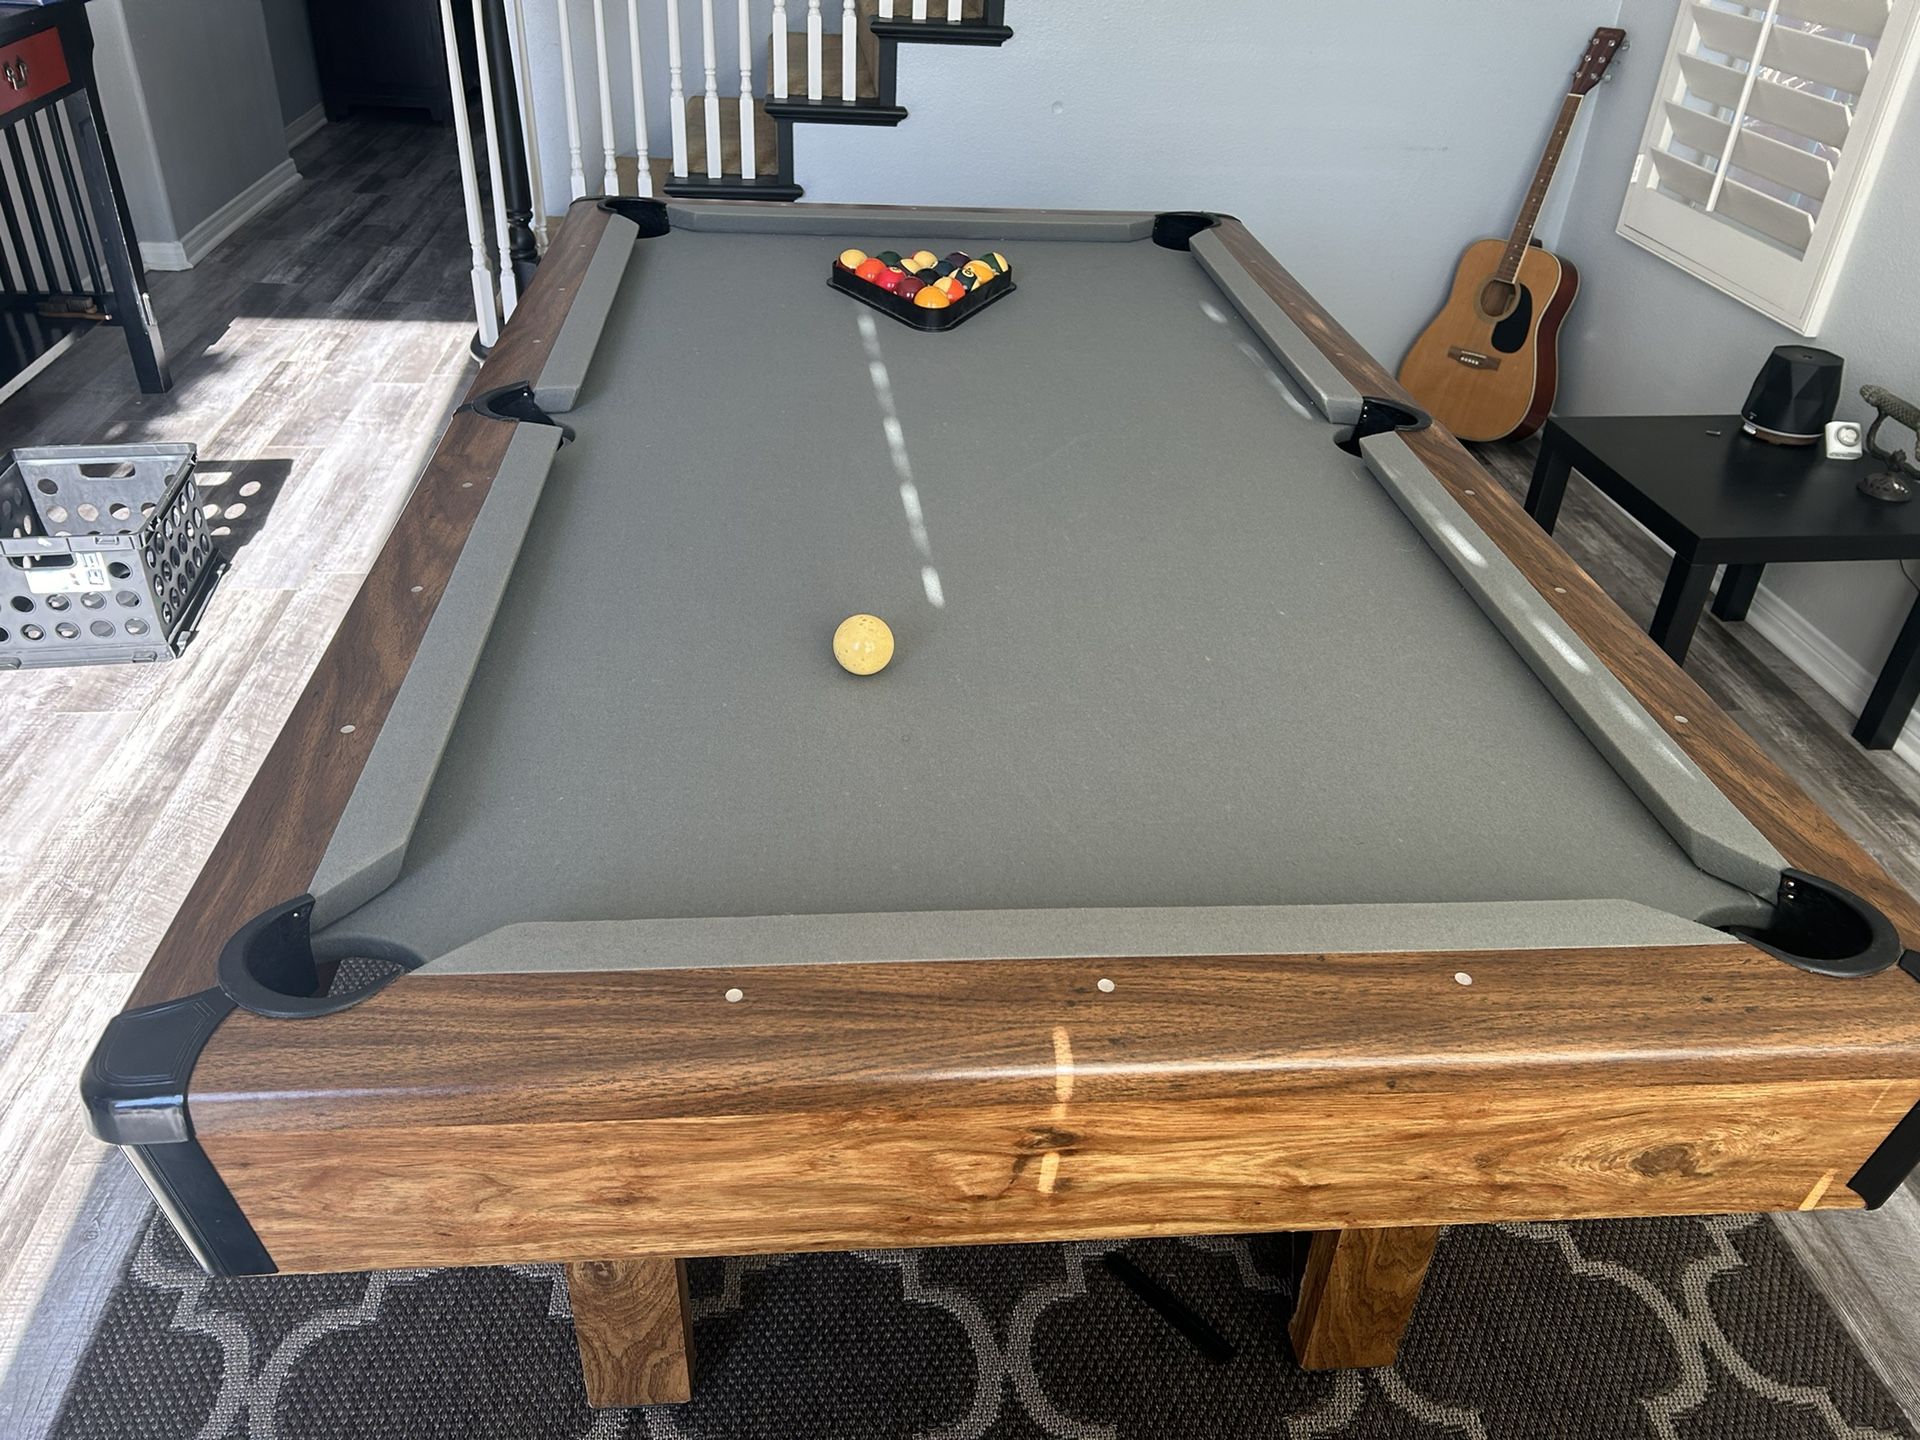 Pool table 7ft